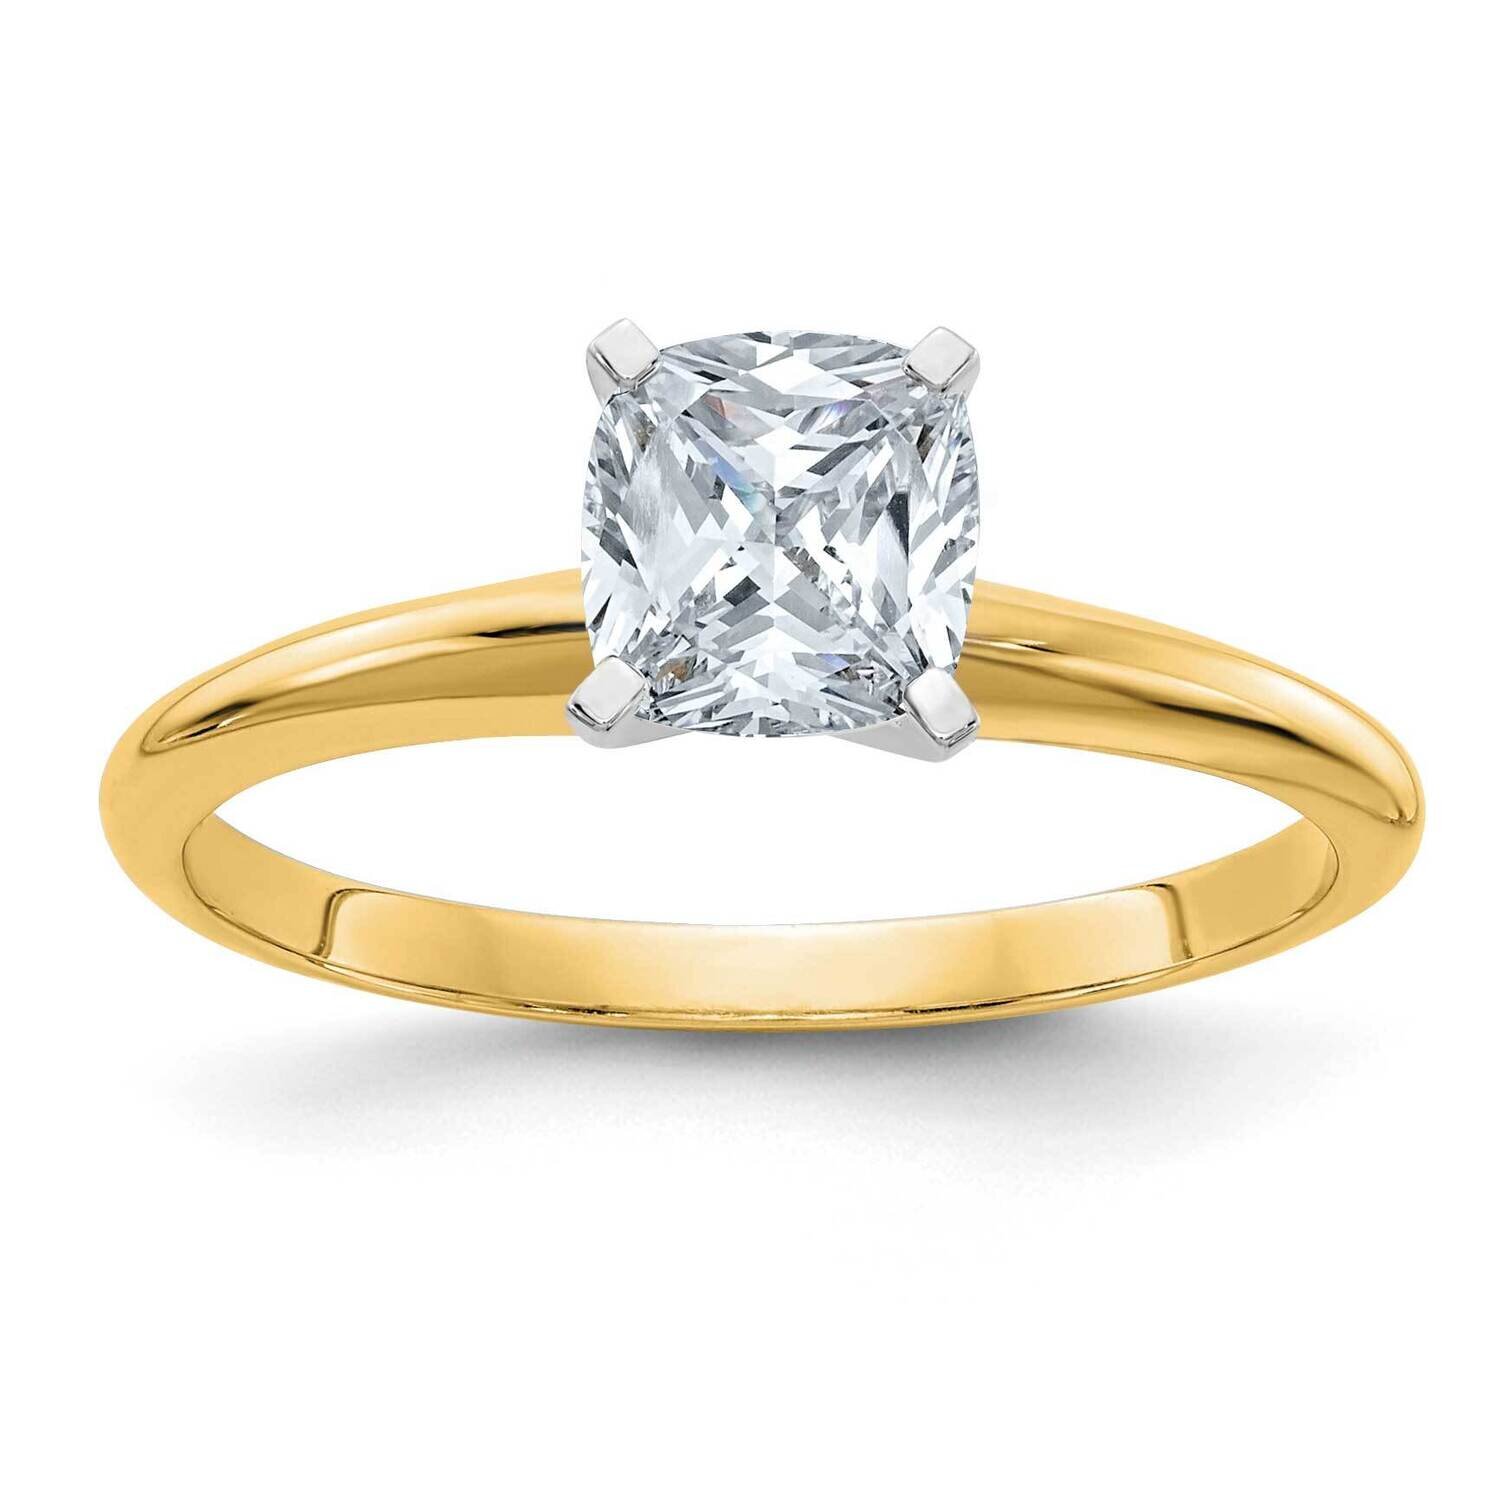 1ct. D E F Pure Light Cushion Moissanite Solitaire Ring 14k Gold YGSH13C-12MP-6